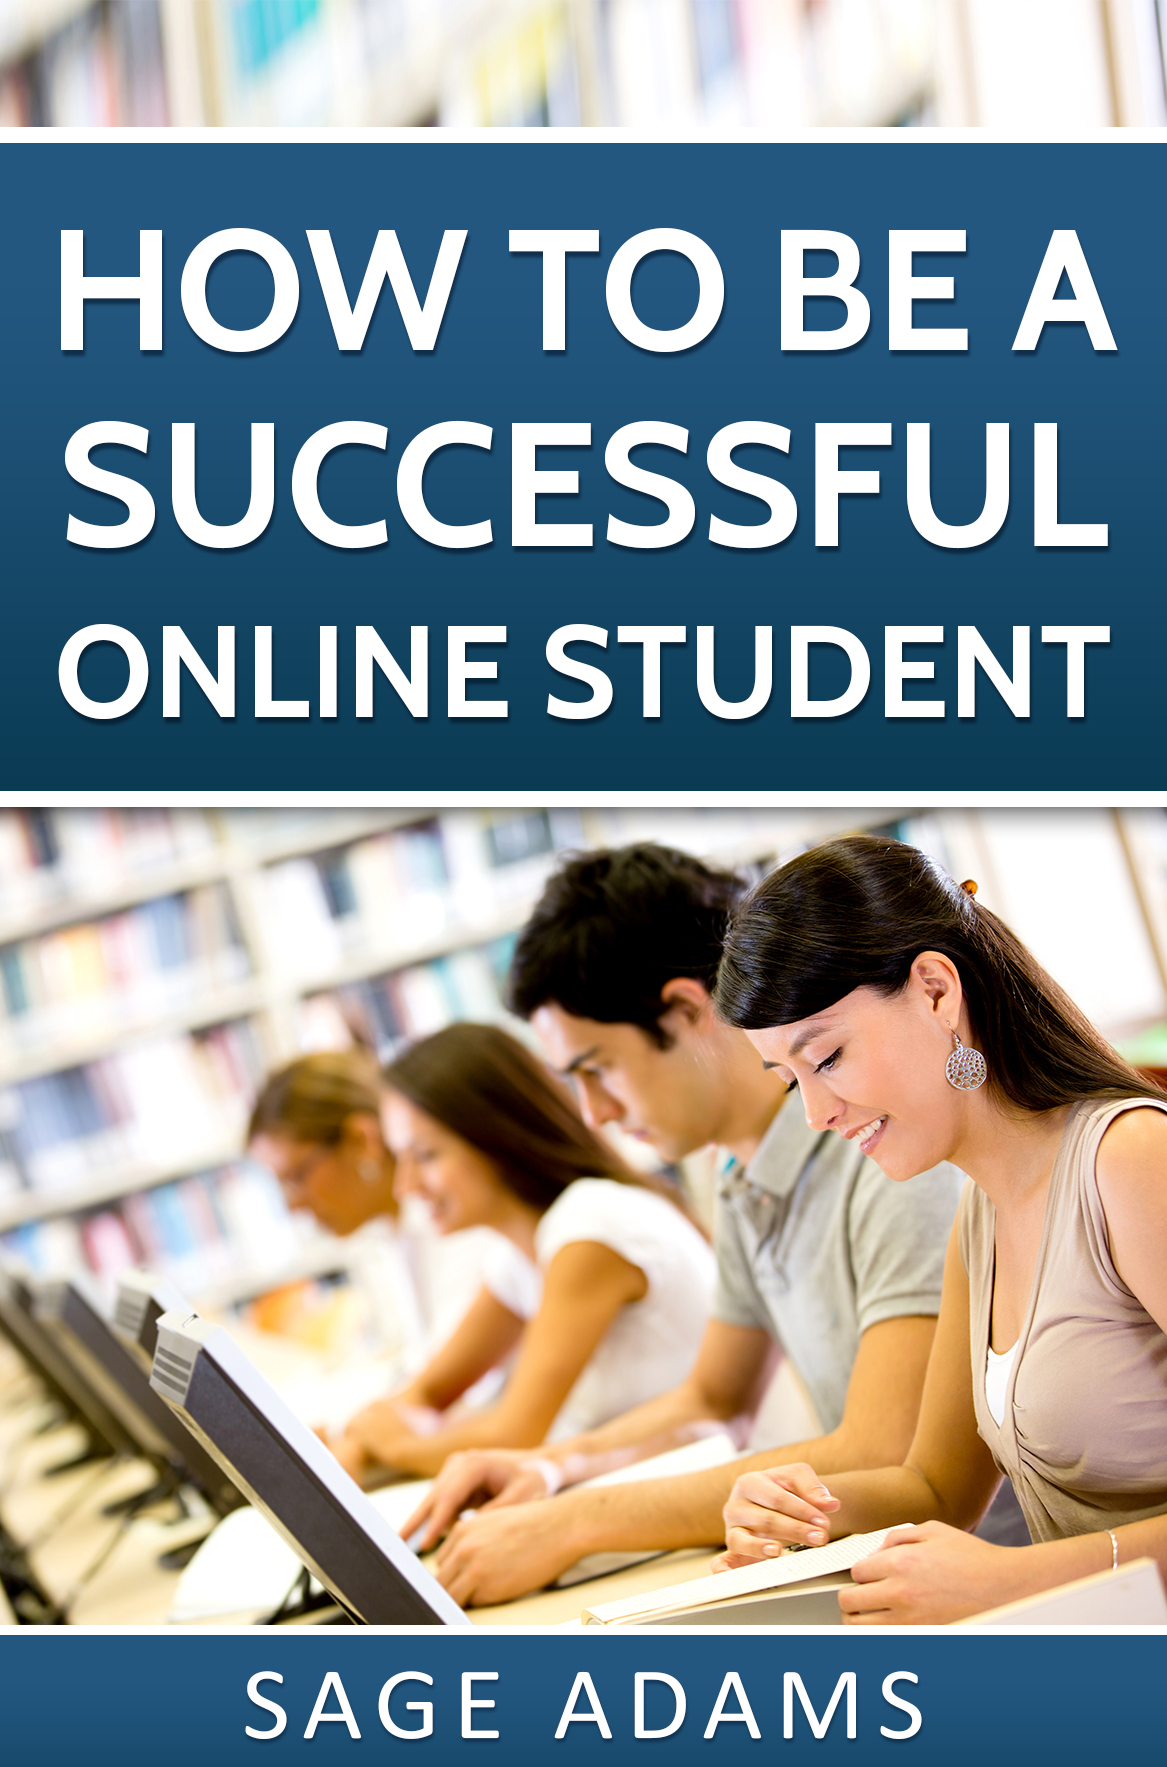 FREE: How to be a Successful Online Student by Sage Adams